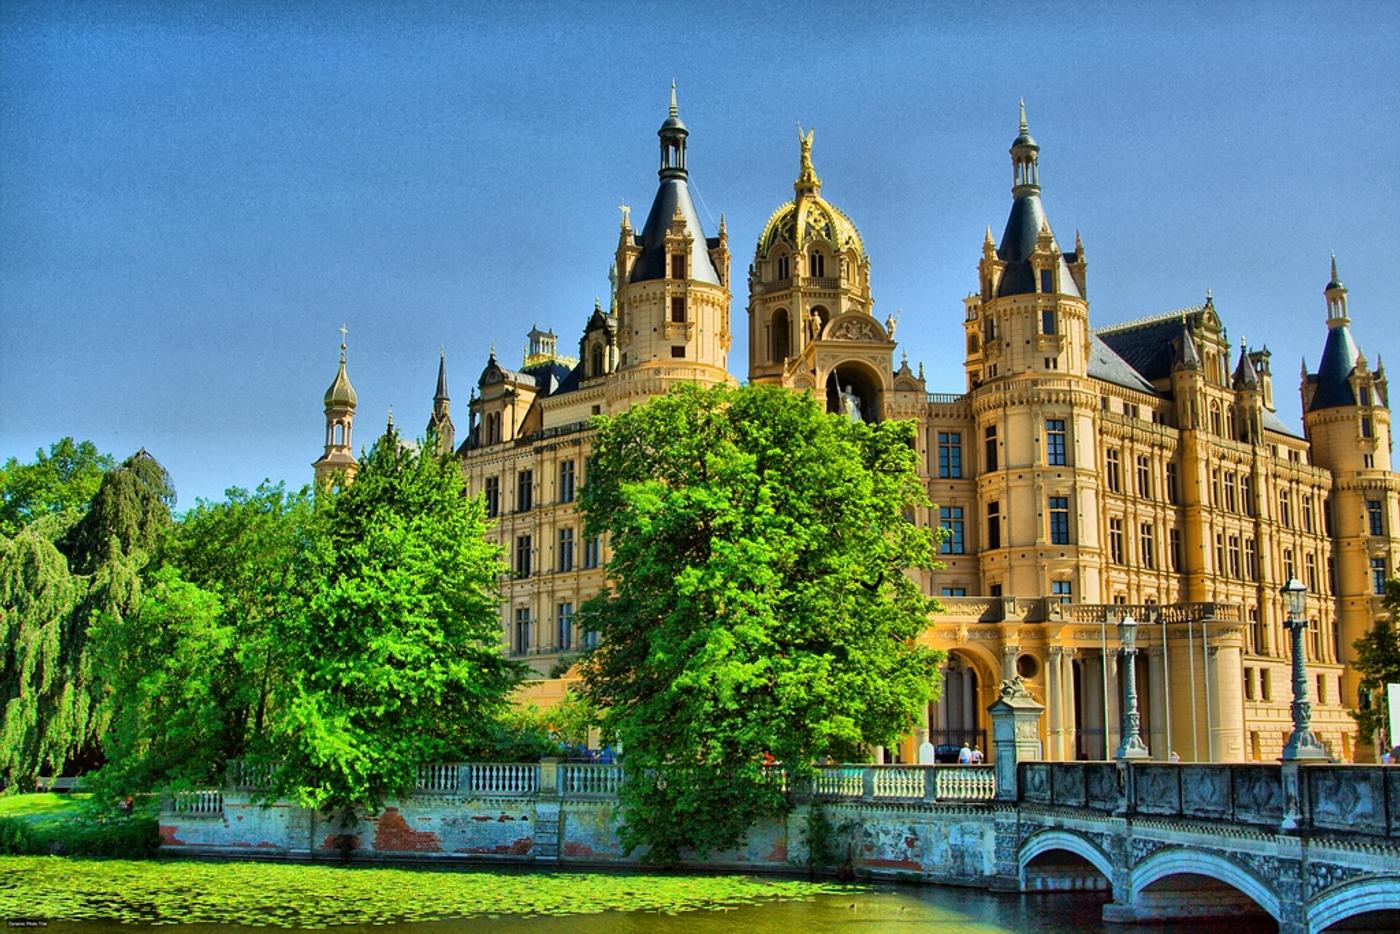 Discover Schwerin's magical world